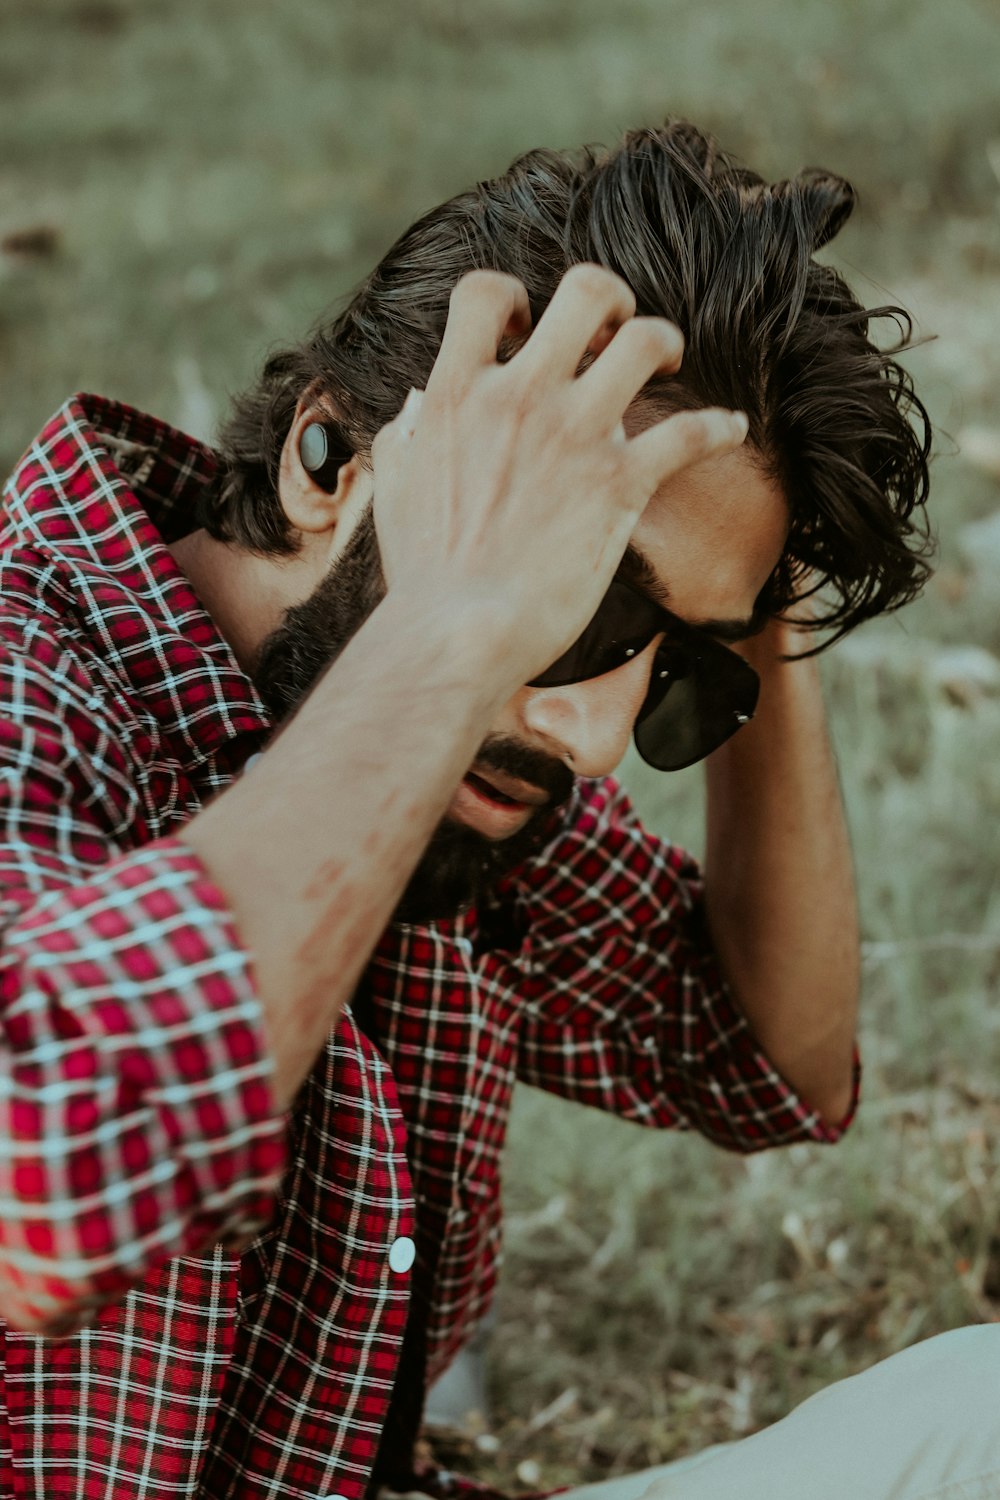 man in red and black plaid shirt covering face with his hands